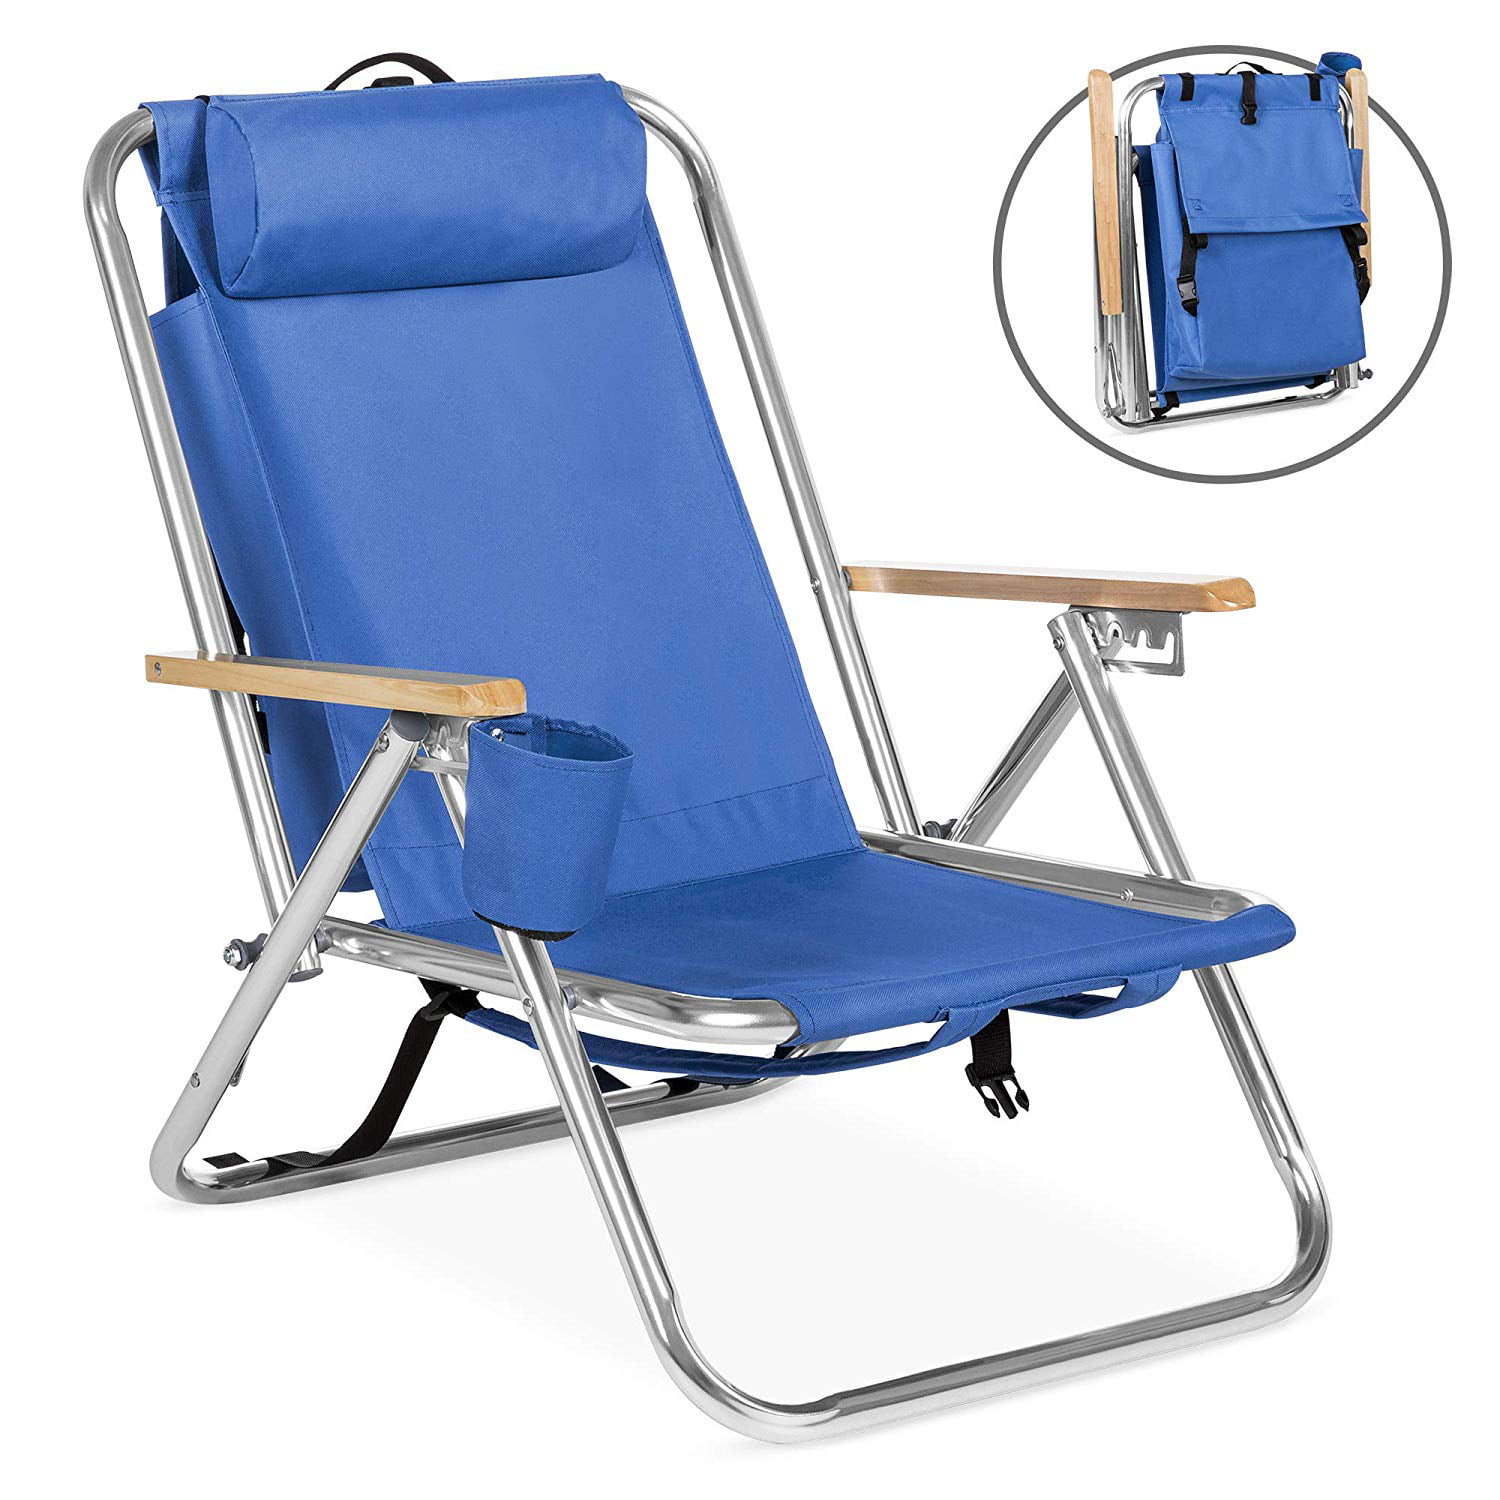 Beach Chair, Folding Portable Beach Chair, Adjustable Lounge Chair Recliners for Camping, lawn